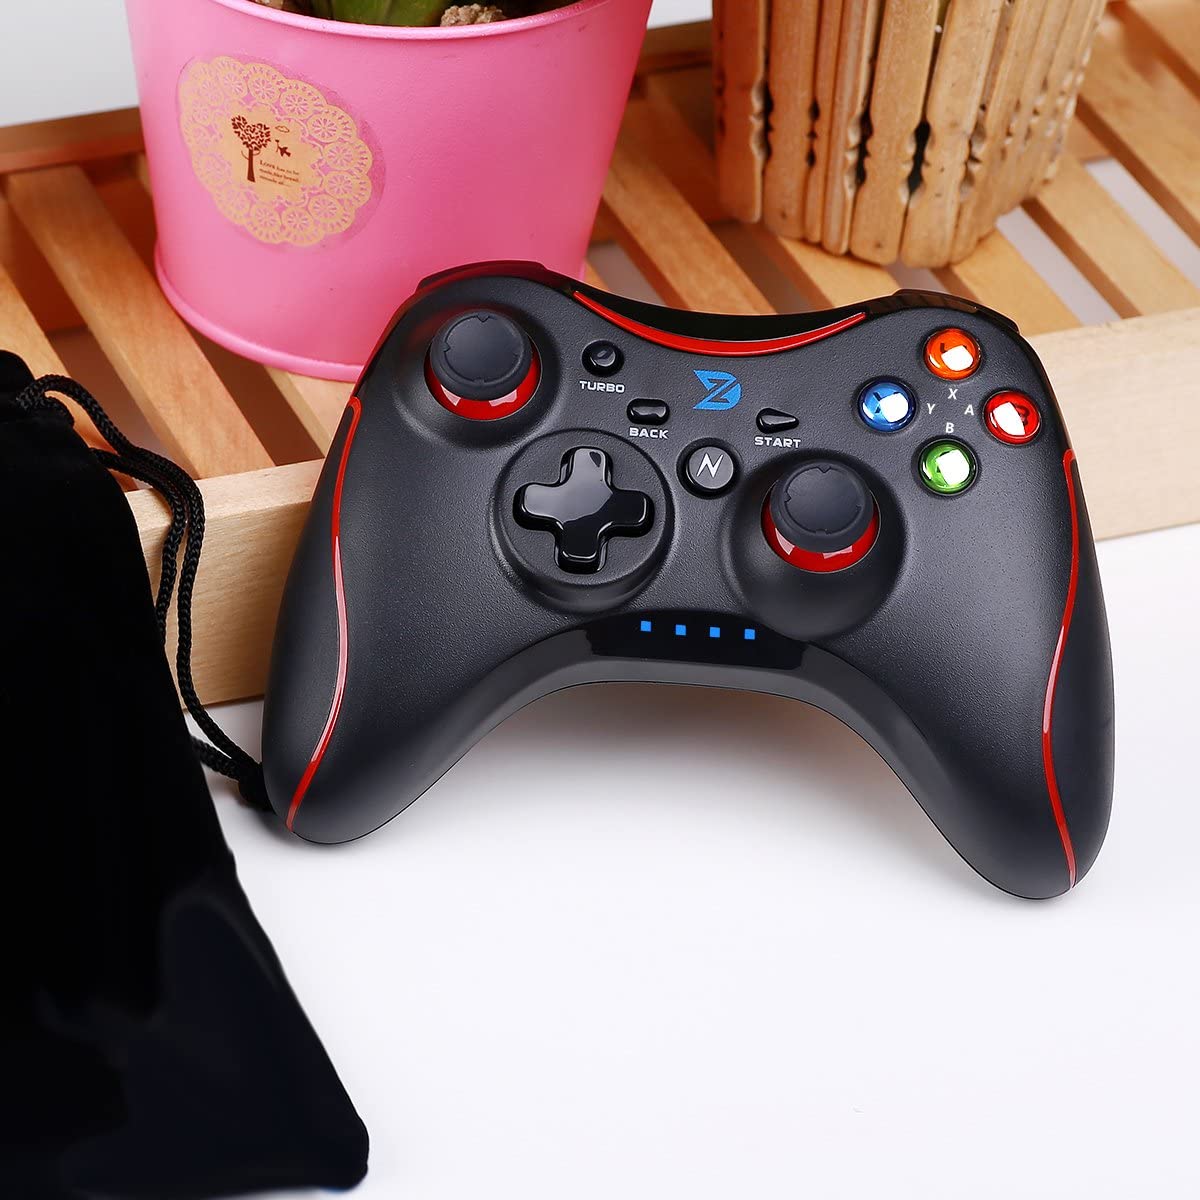 ZD-N208-24G-Wireless-Gaming-Controller-Gamepad-with-Vibration-Feedback-for-Steam-Switch-PC-Android-T-1698519